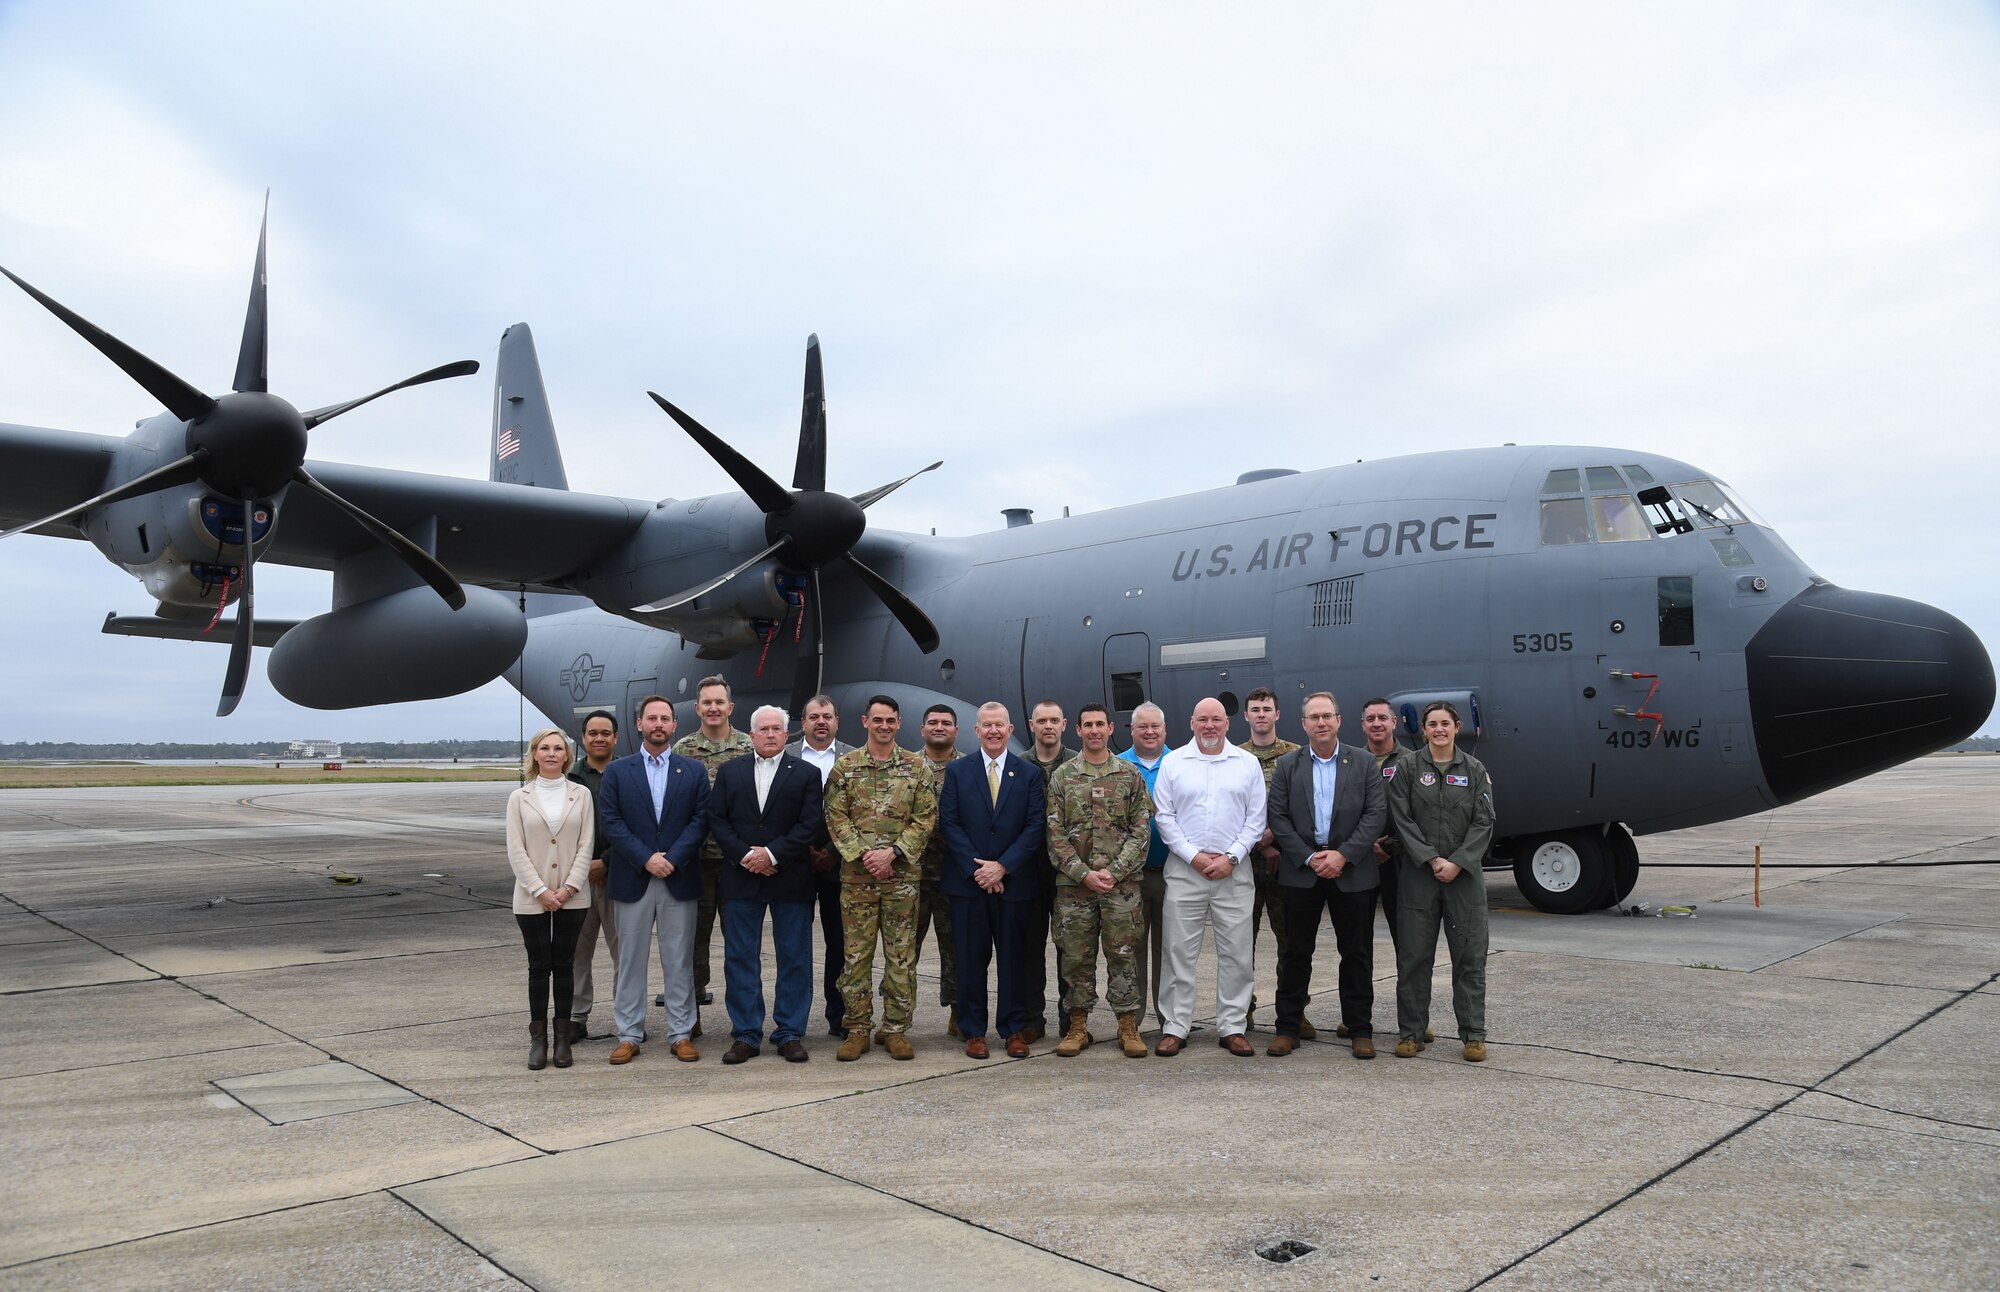 Keesler leadership poses for a group photo with Congressman Mike Ezell, South Mississippi 4th Congressional District representative, and his staff, during an immersion tour at Keesler Air Force Base, Mississippi, Feb. 15, 2023.